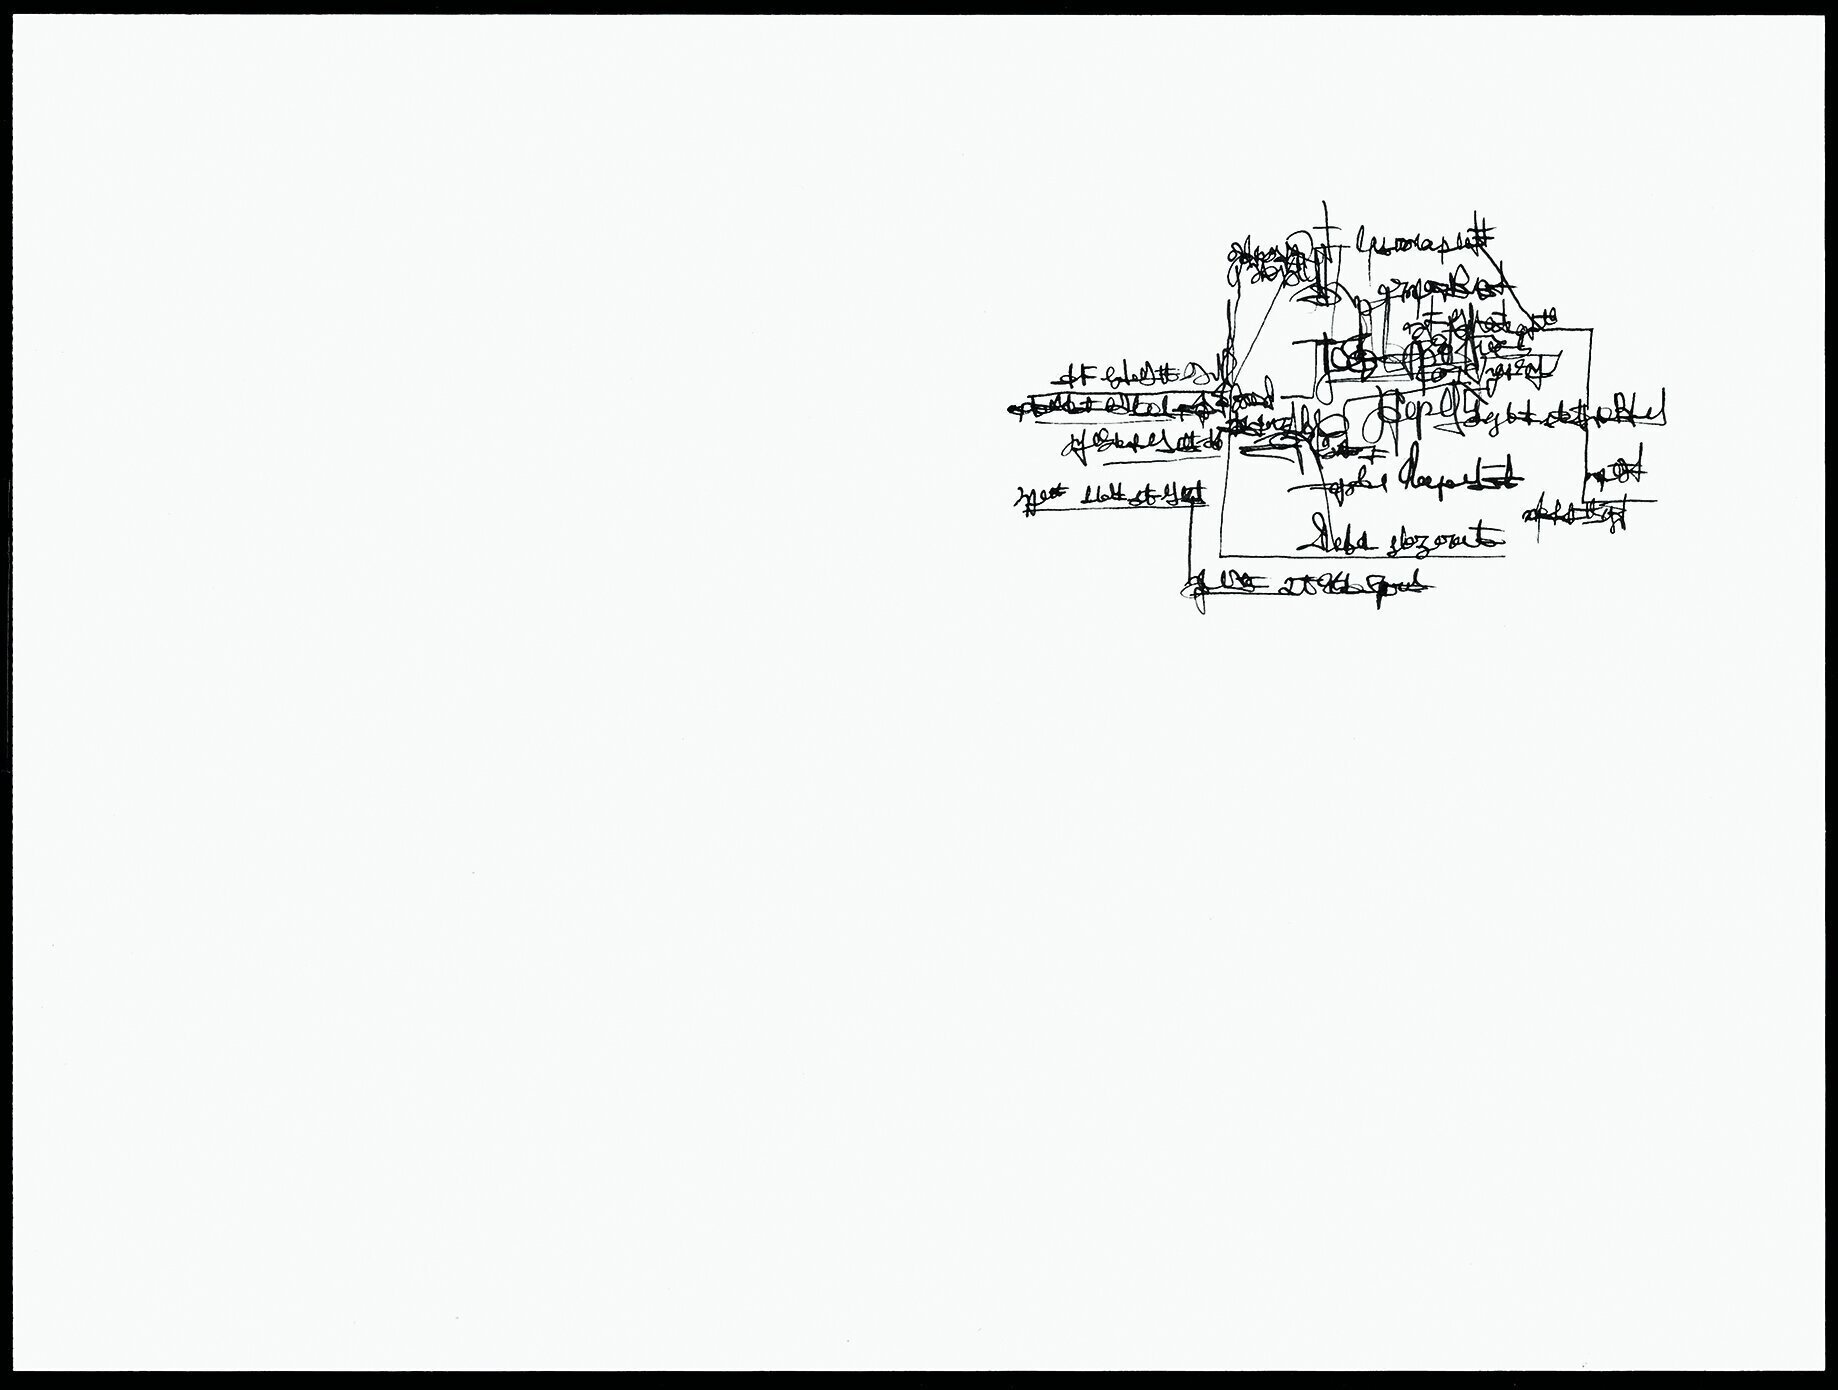  Renee Gladman, Prose Architectures 28, ink on paper, 9 x 12 inches, 2013. 